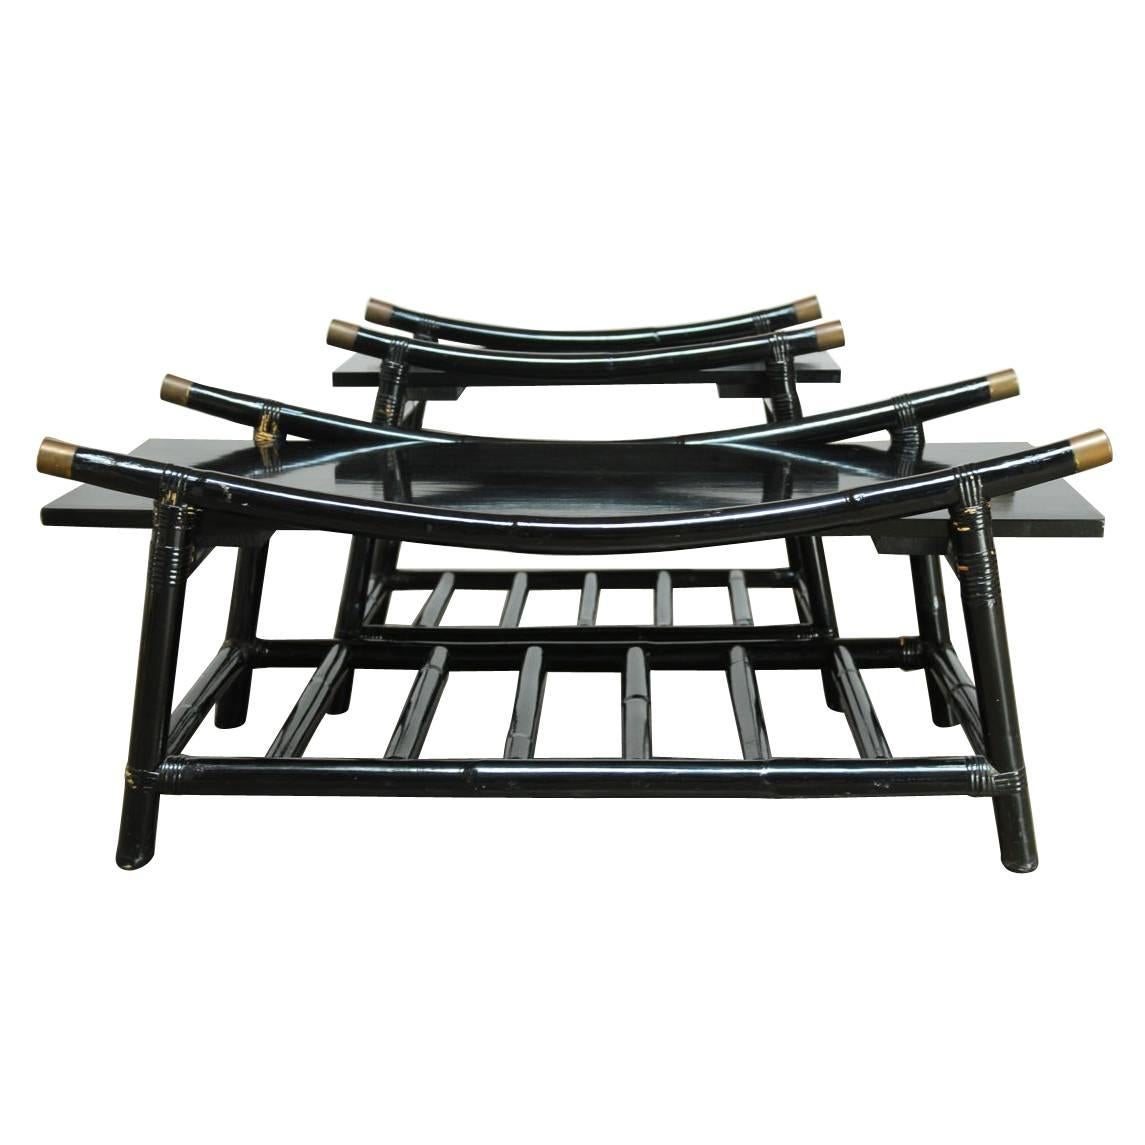 Black Lacquer Rattan Coffee Table and Side Table, Attributed to Ficks Reed